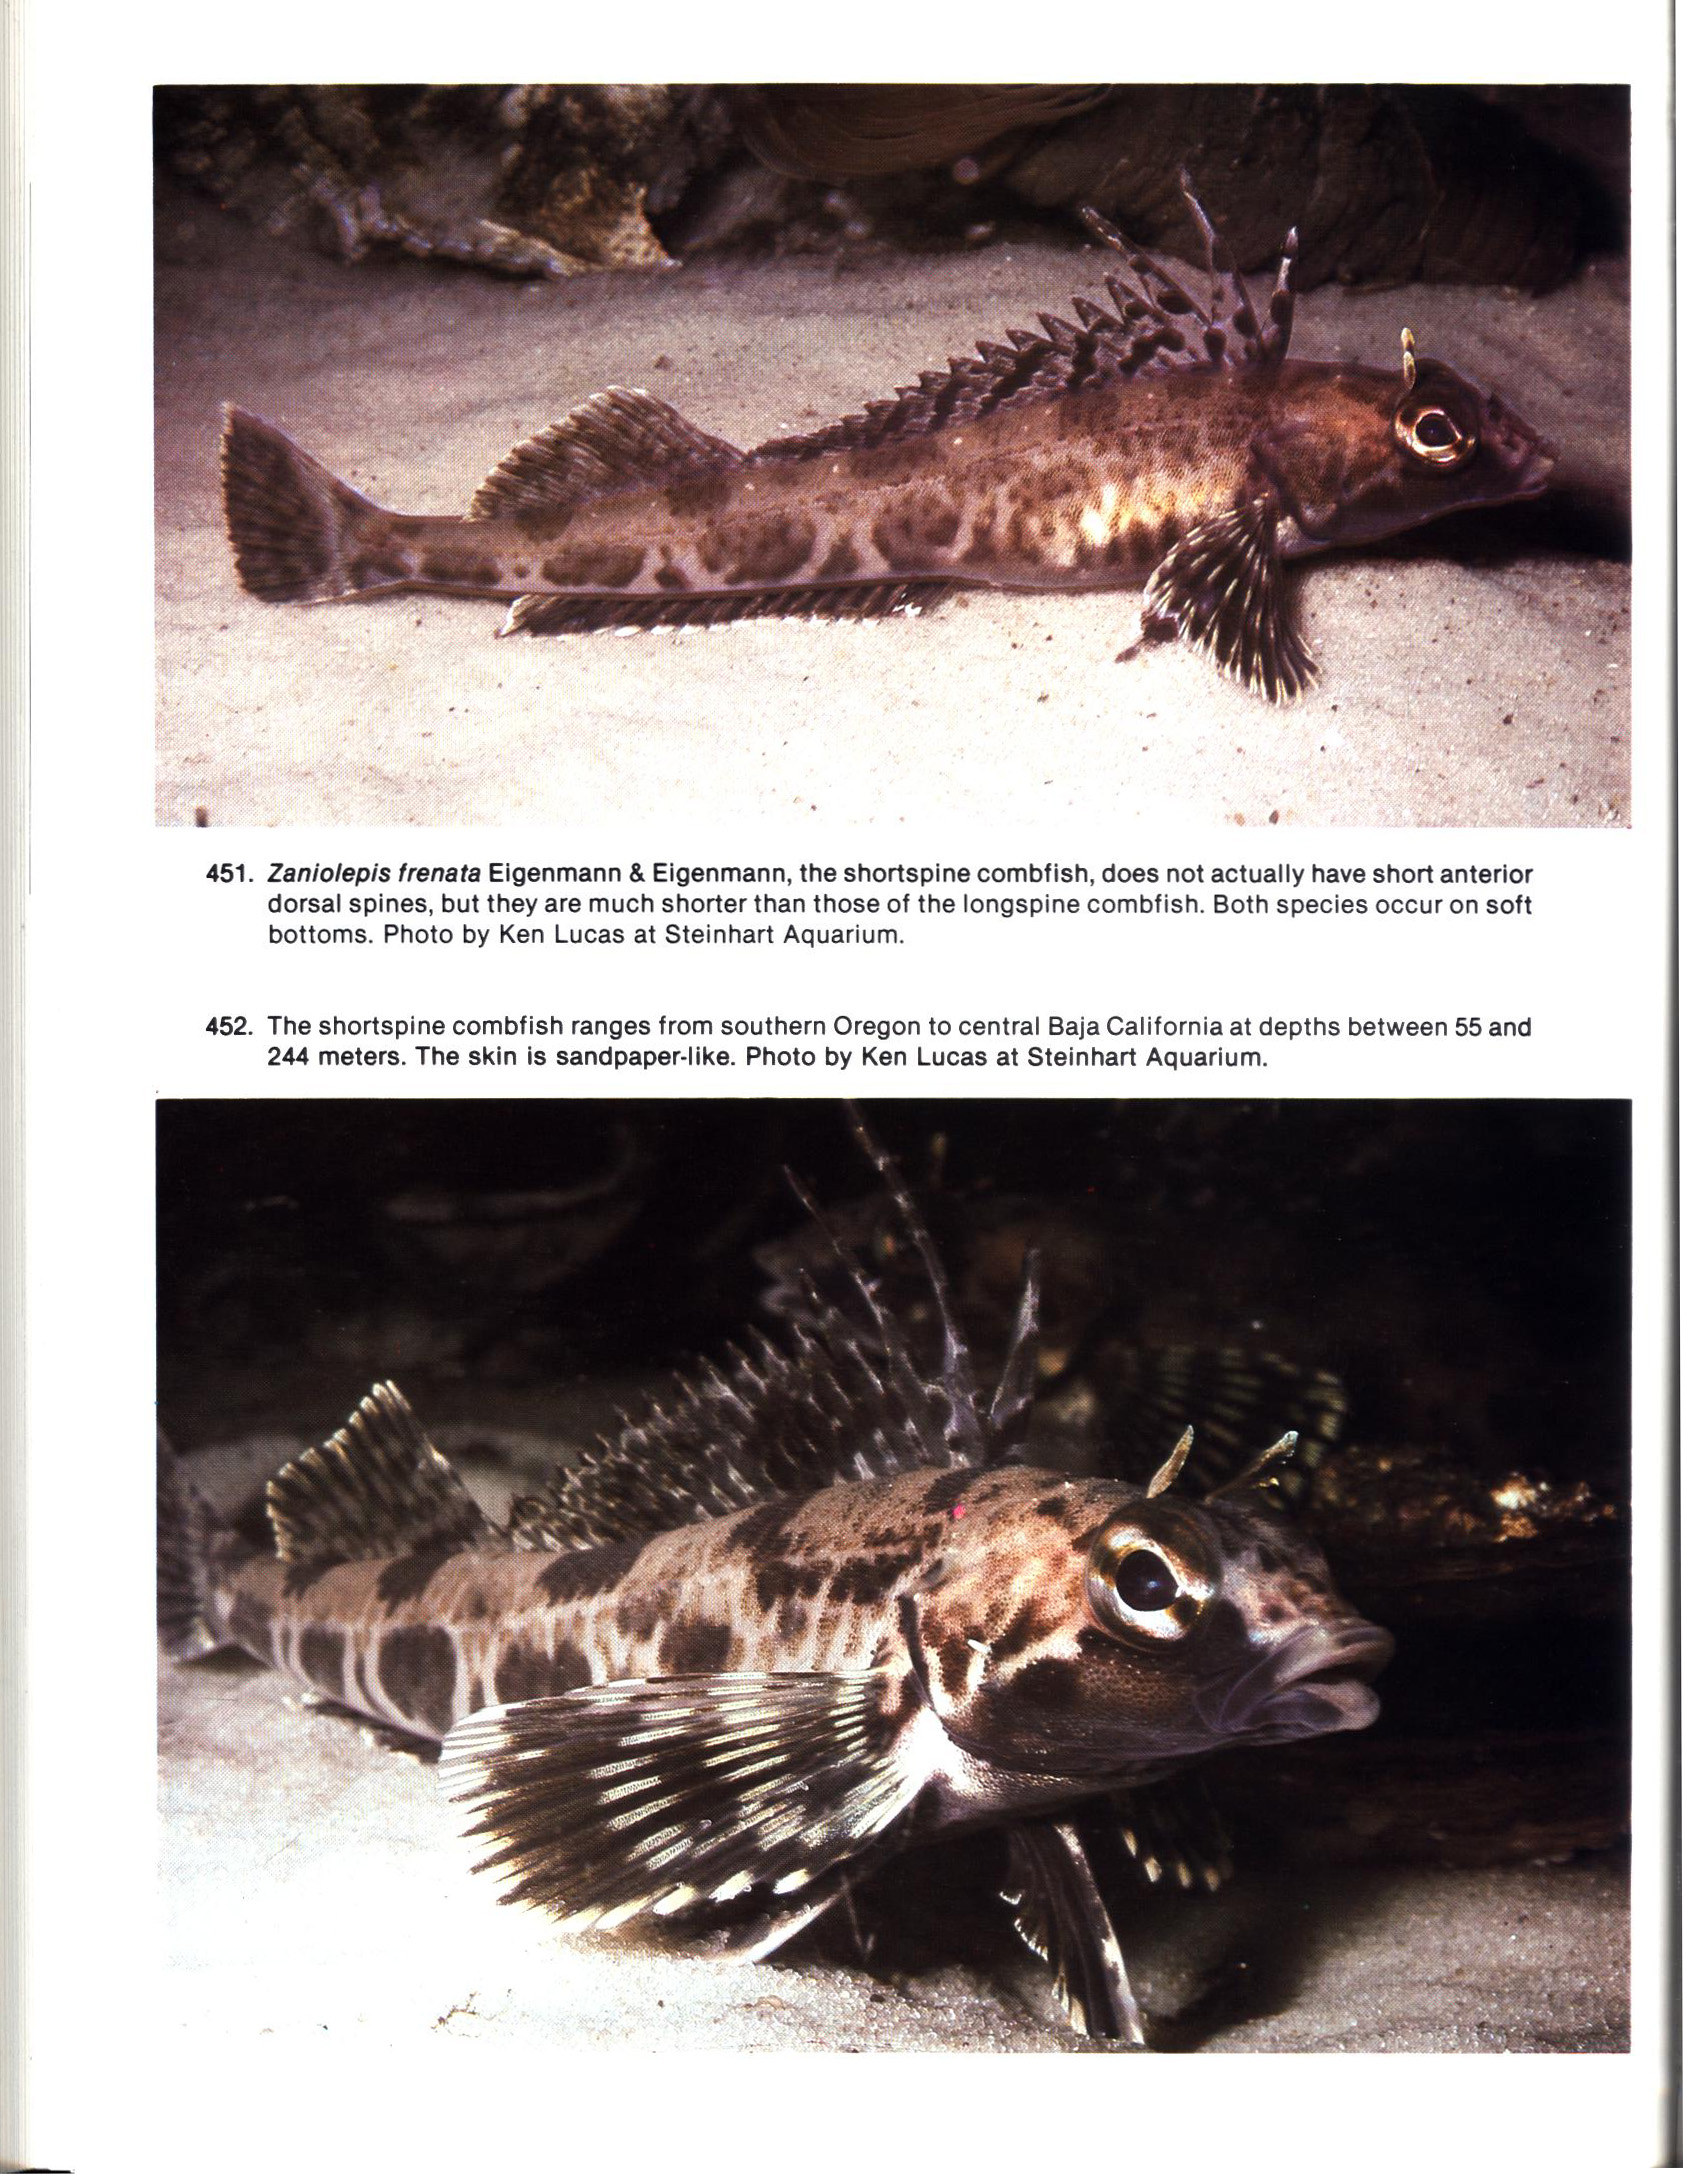 FISHES OF CALIFORNIA AND WESTERN MEXICO: Pacific marine fishes, Book 8 (California & Western Mexico). tfhp6102j